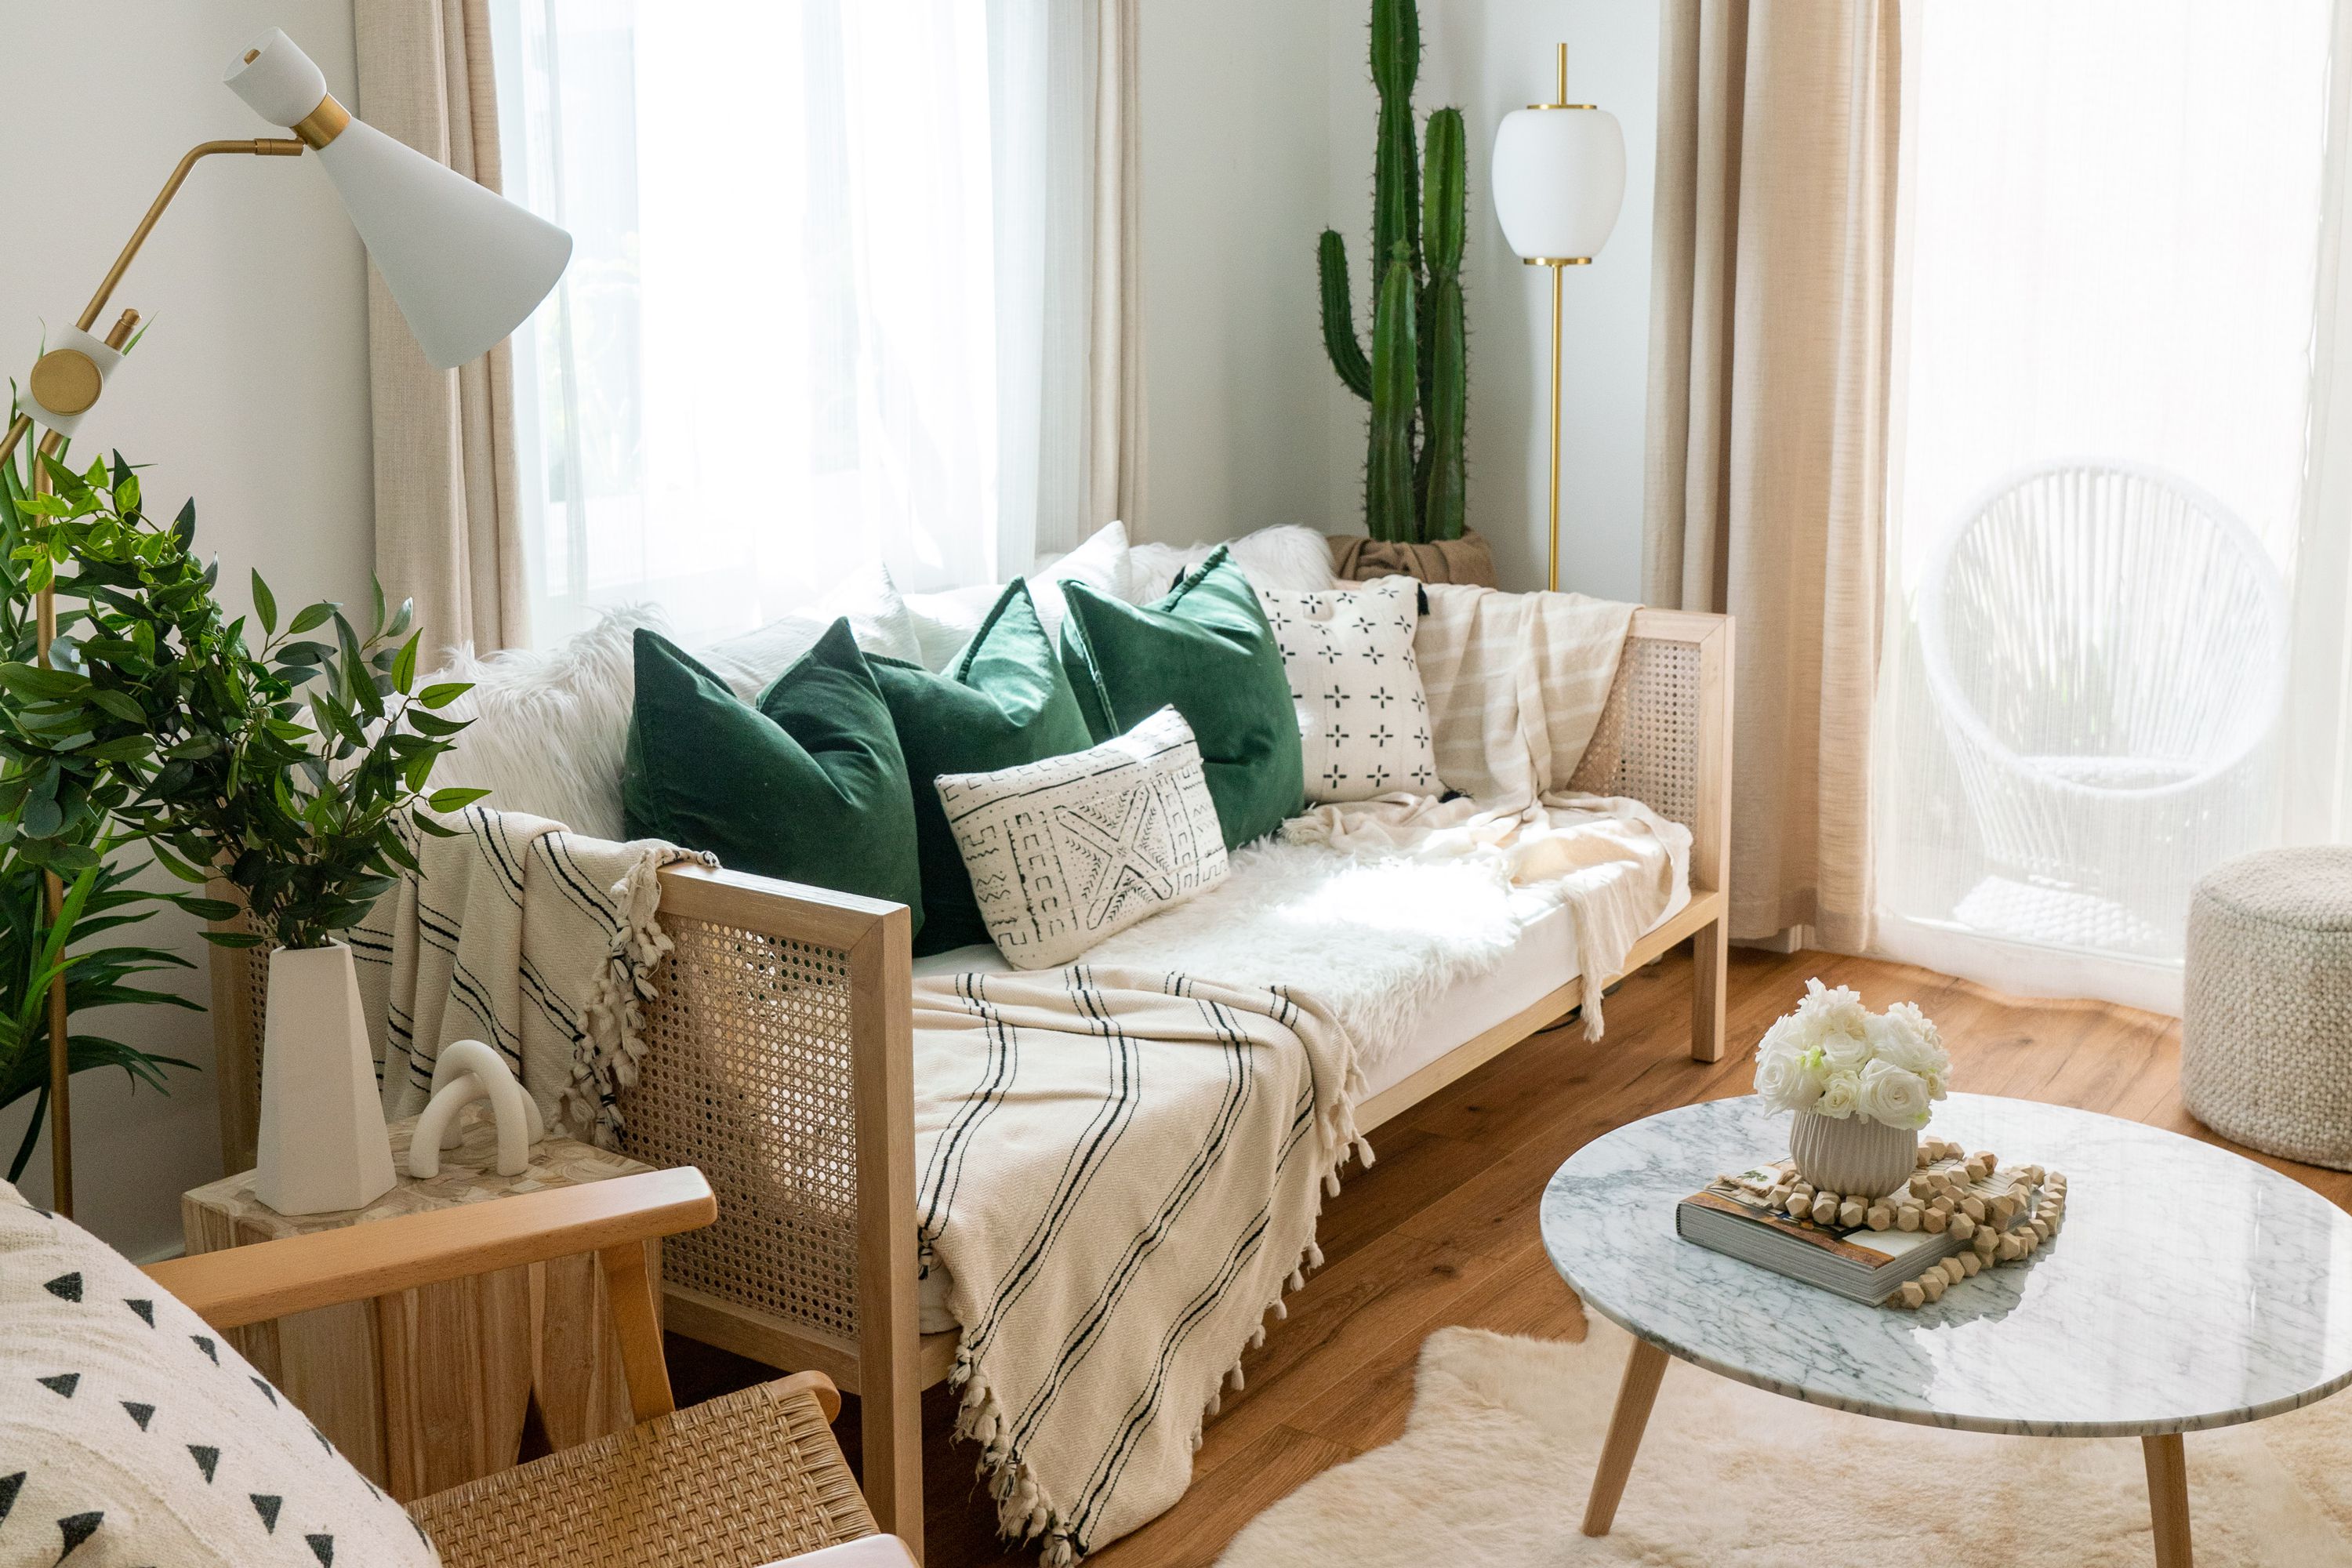 22 Ways to Mix Patterns and Prints in Your Home Decor